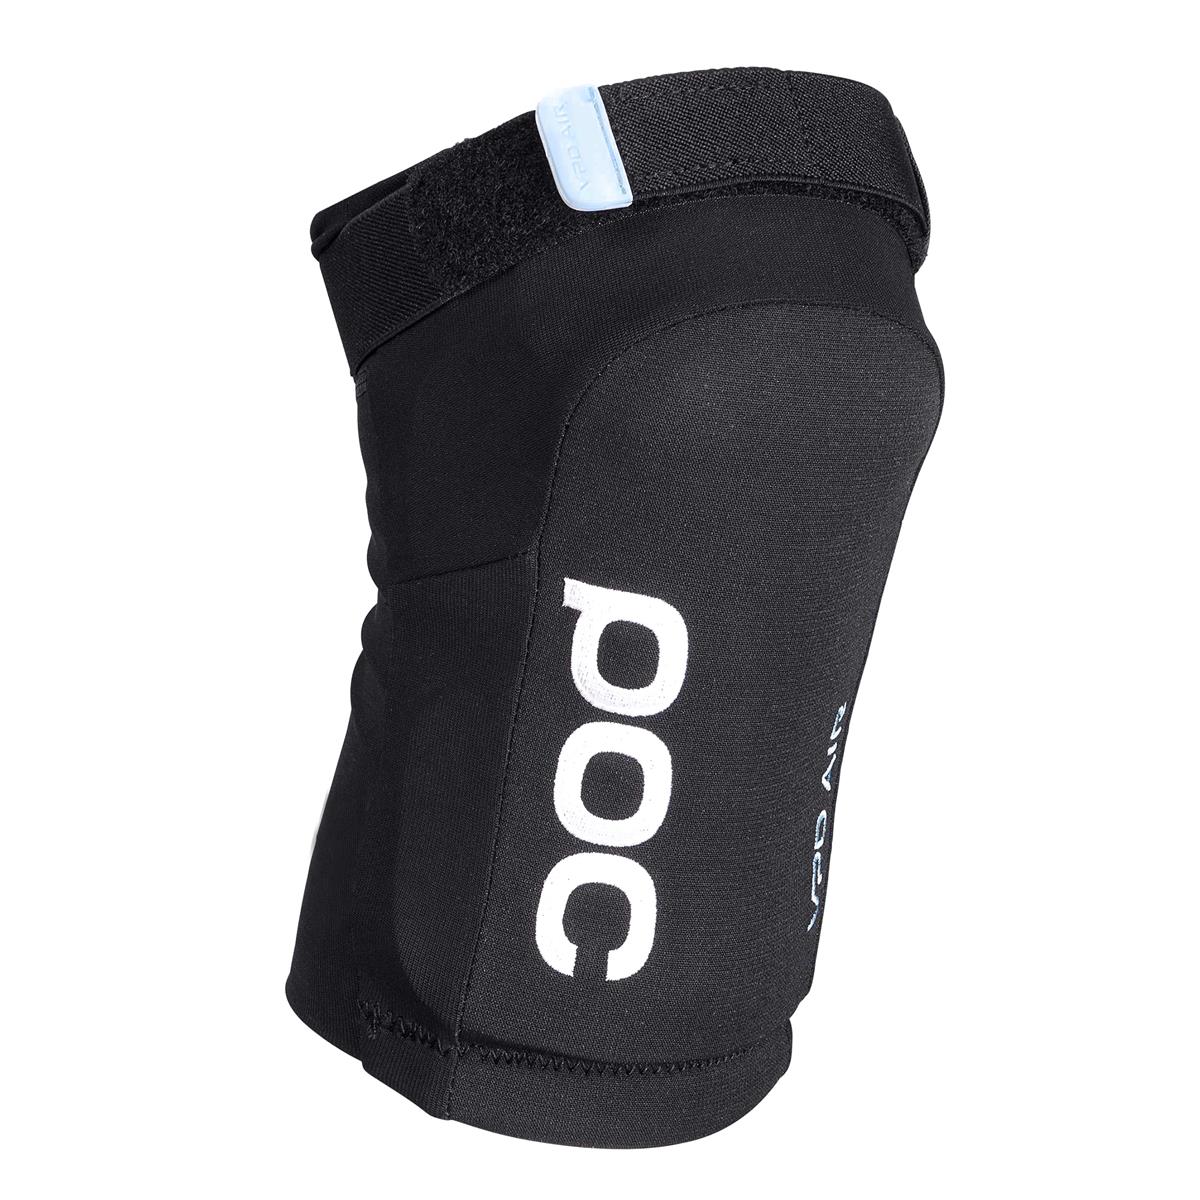 Joint VPD Air Knee pads black Size L